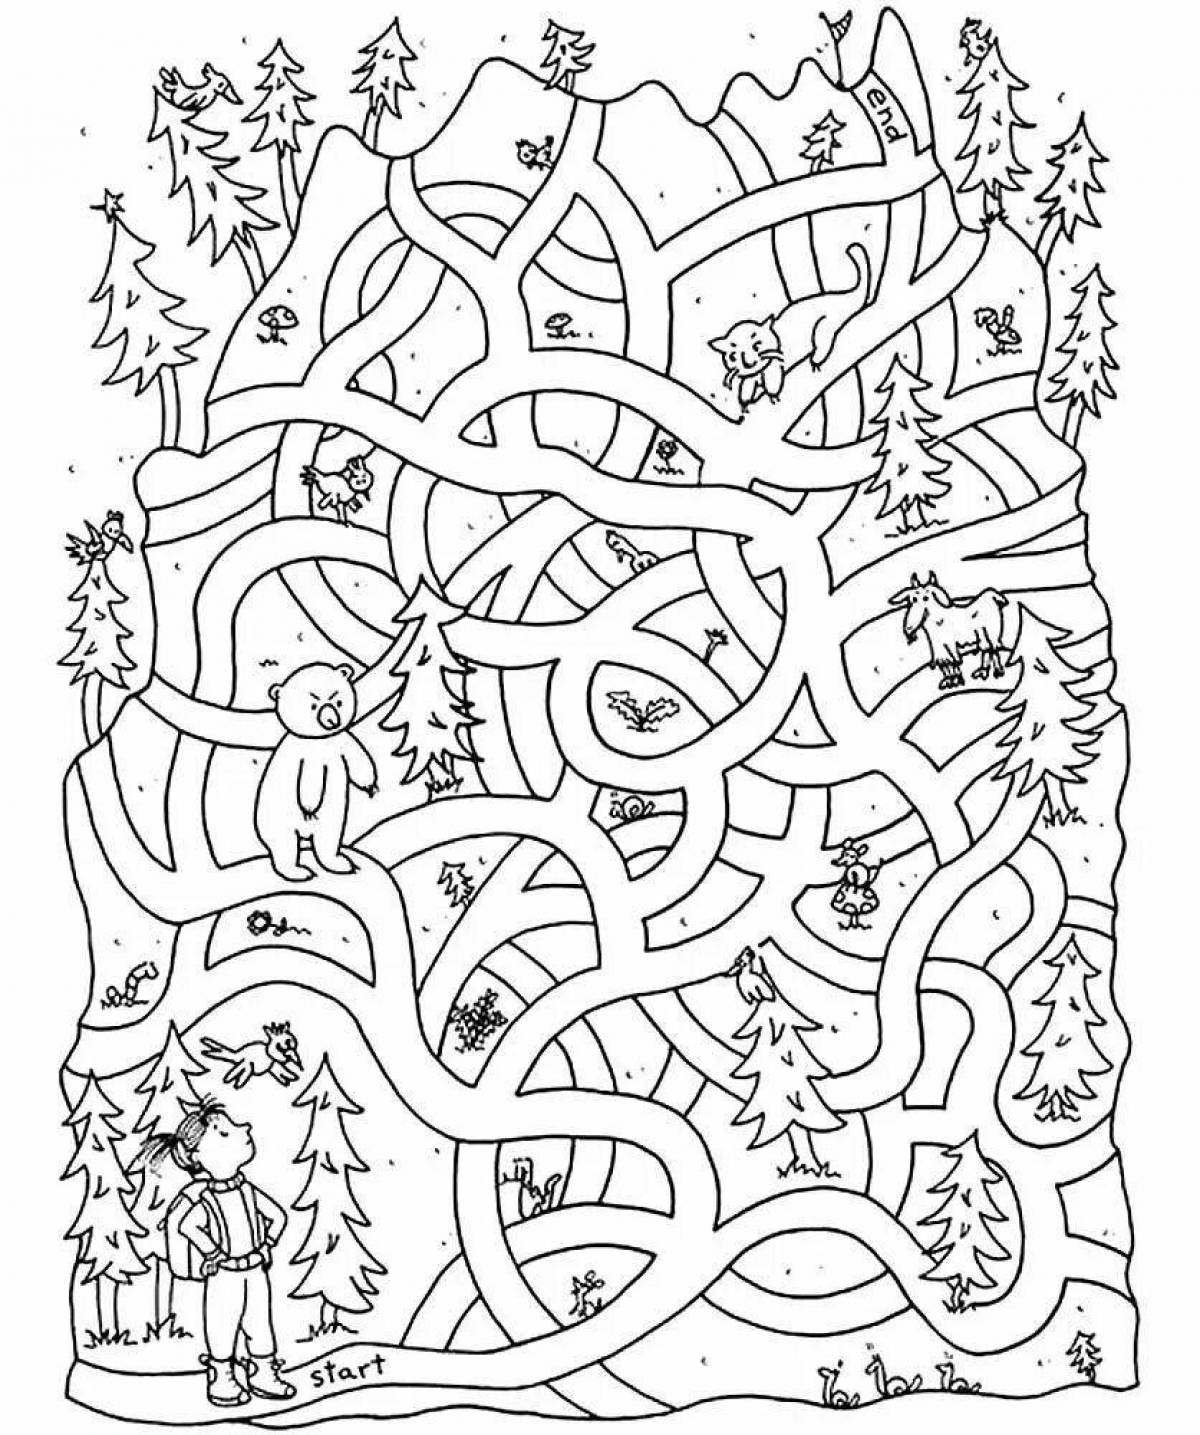 Mazes for children 6 7 years old #5